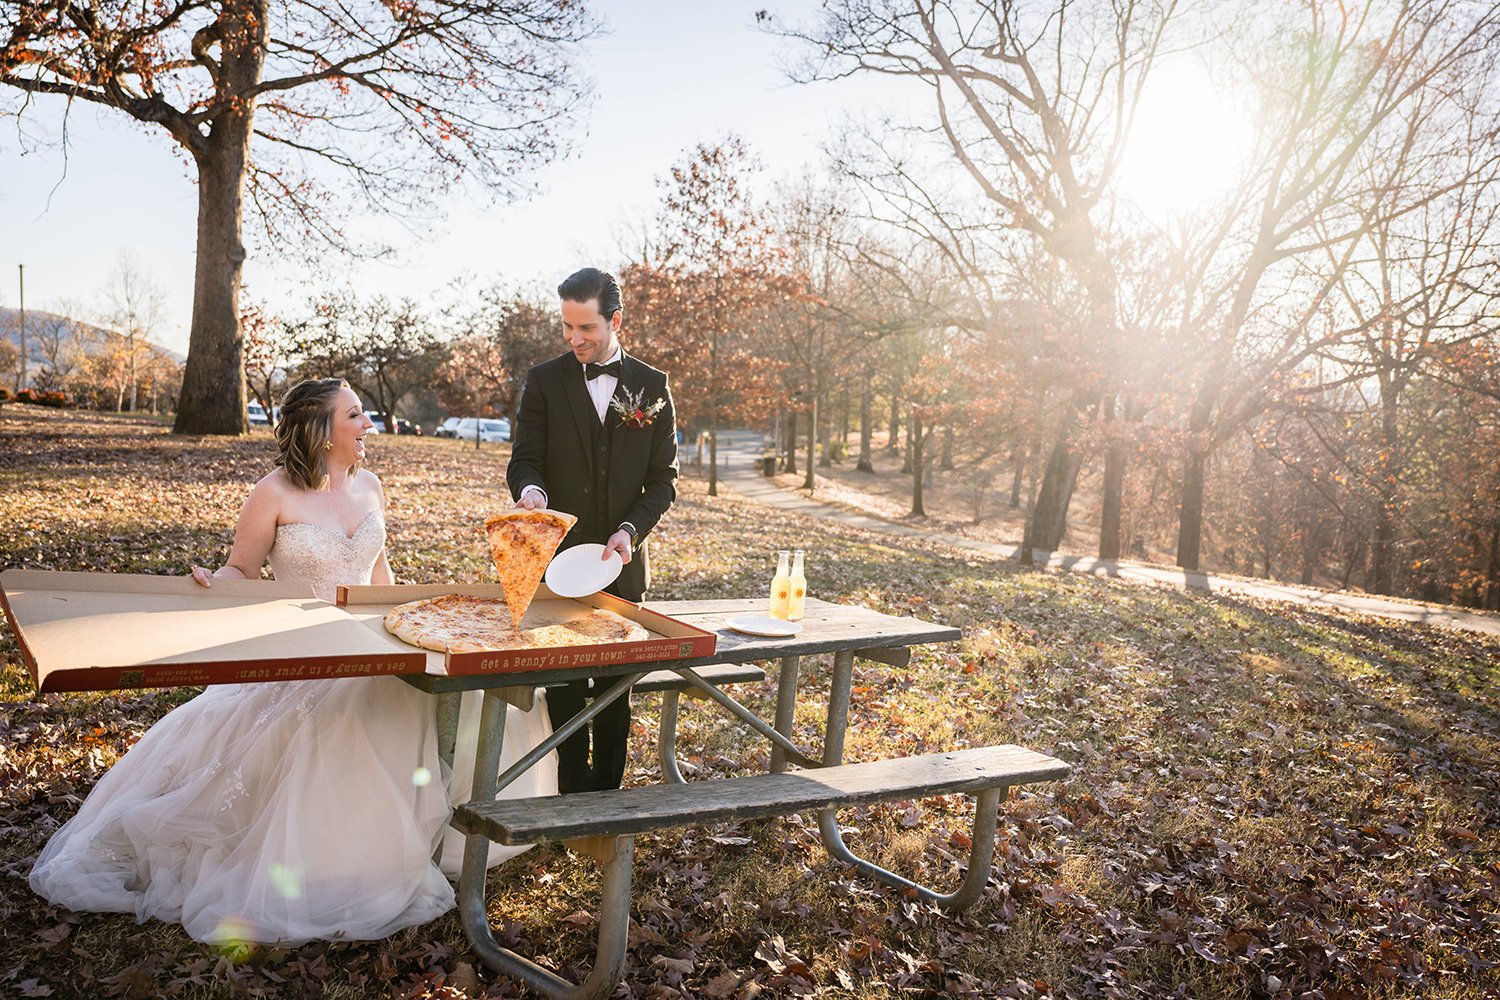  A couple places a large pizza from Benny Marconi's and two IZZE drinks on a picnic table and smile towards at one another as the groom serves a slice to his bride. 